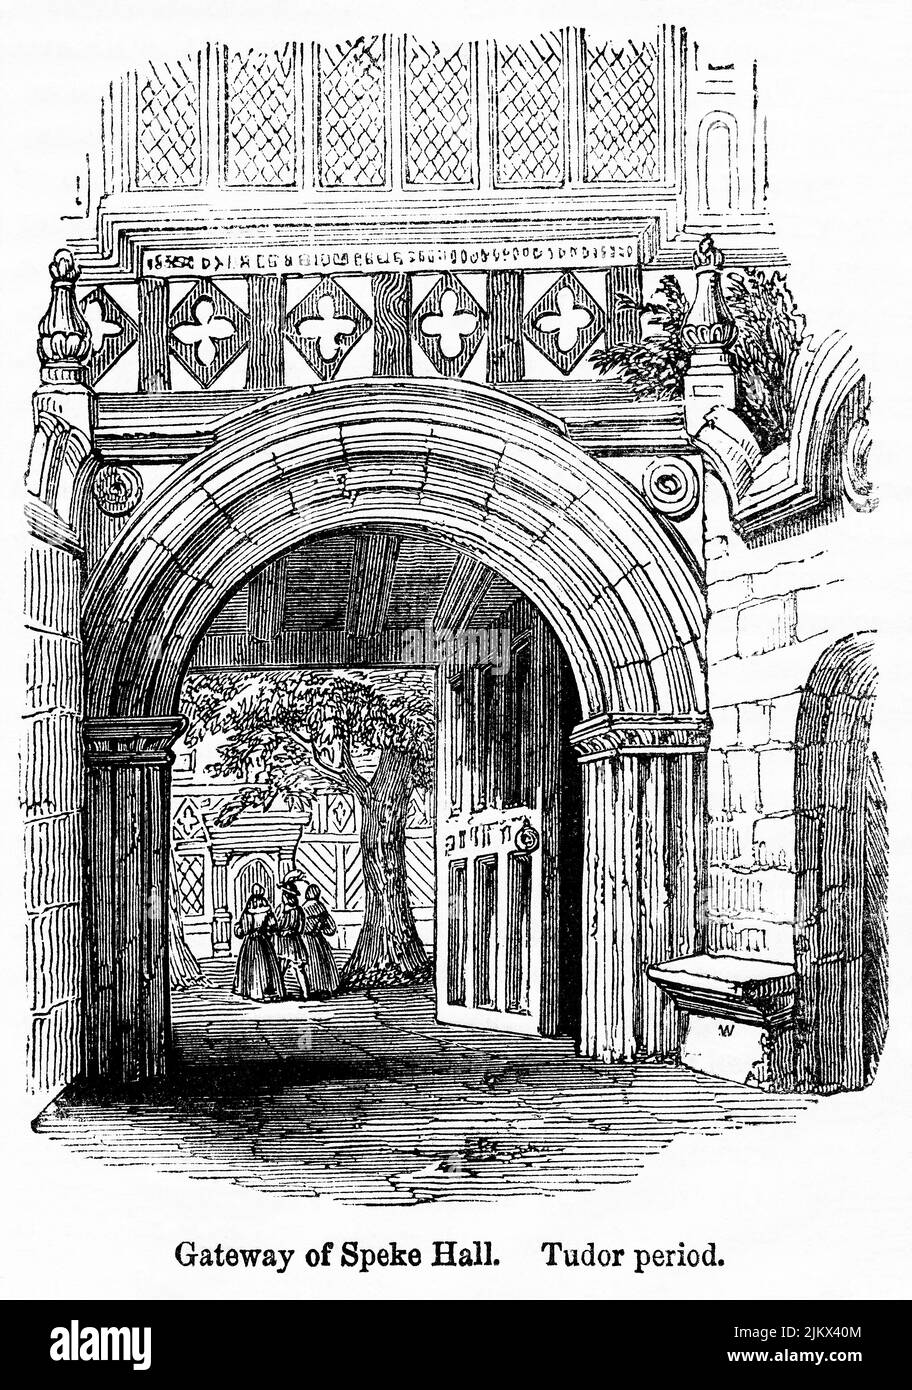 Gateway of Speke Hall,  Tudor Period, Illustration from the Book, 'John Cassel’s Illustrated History of England, Volume II', text by William Howitt, Cassell, Petter, and Galpin, London, 1858 Stock Photo